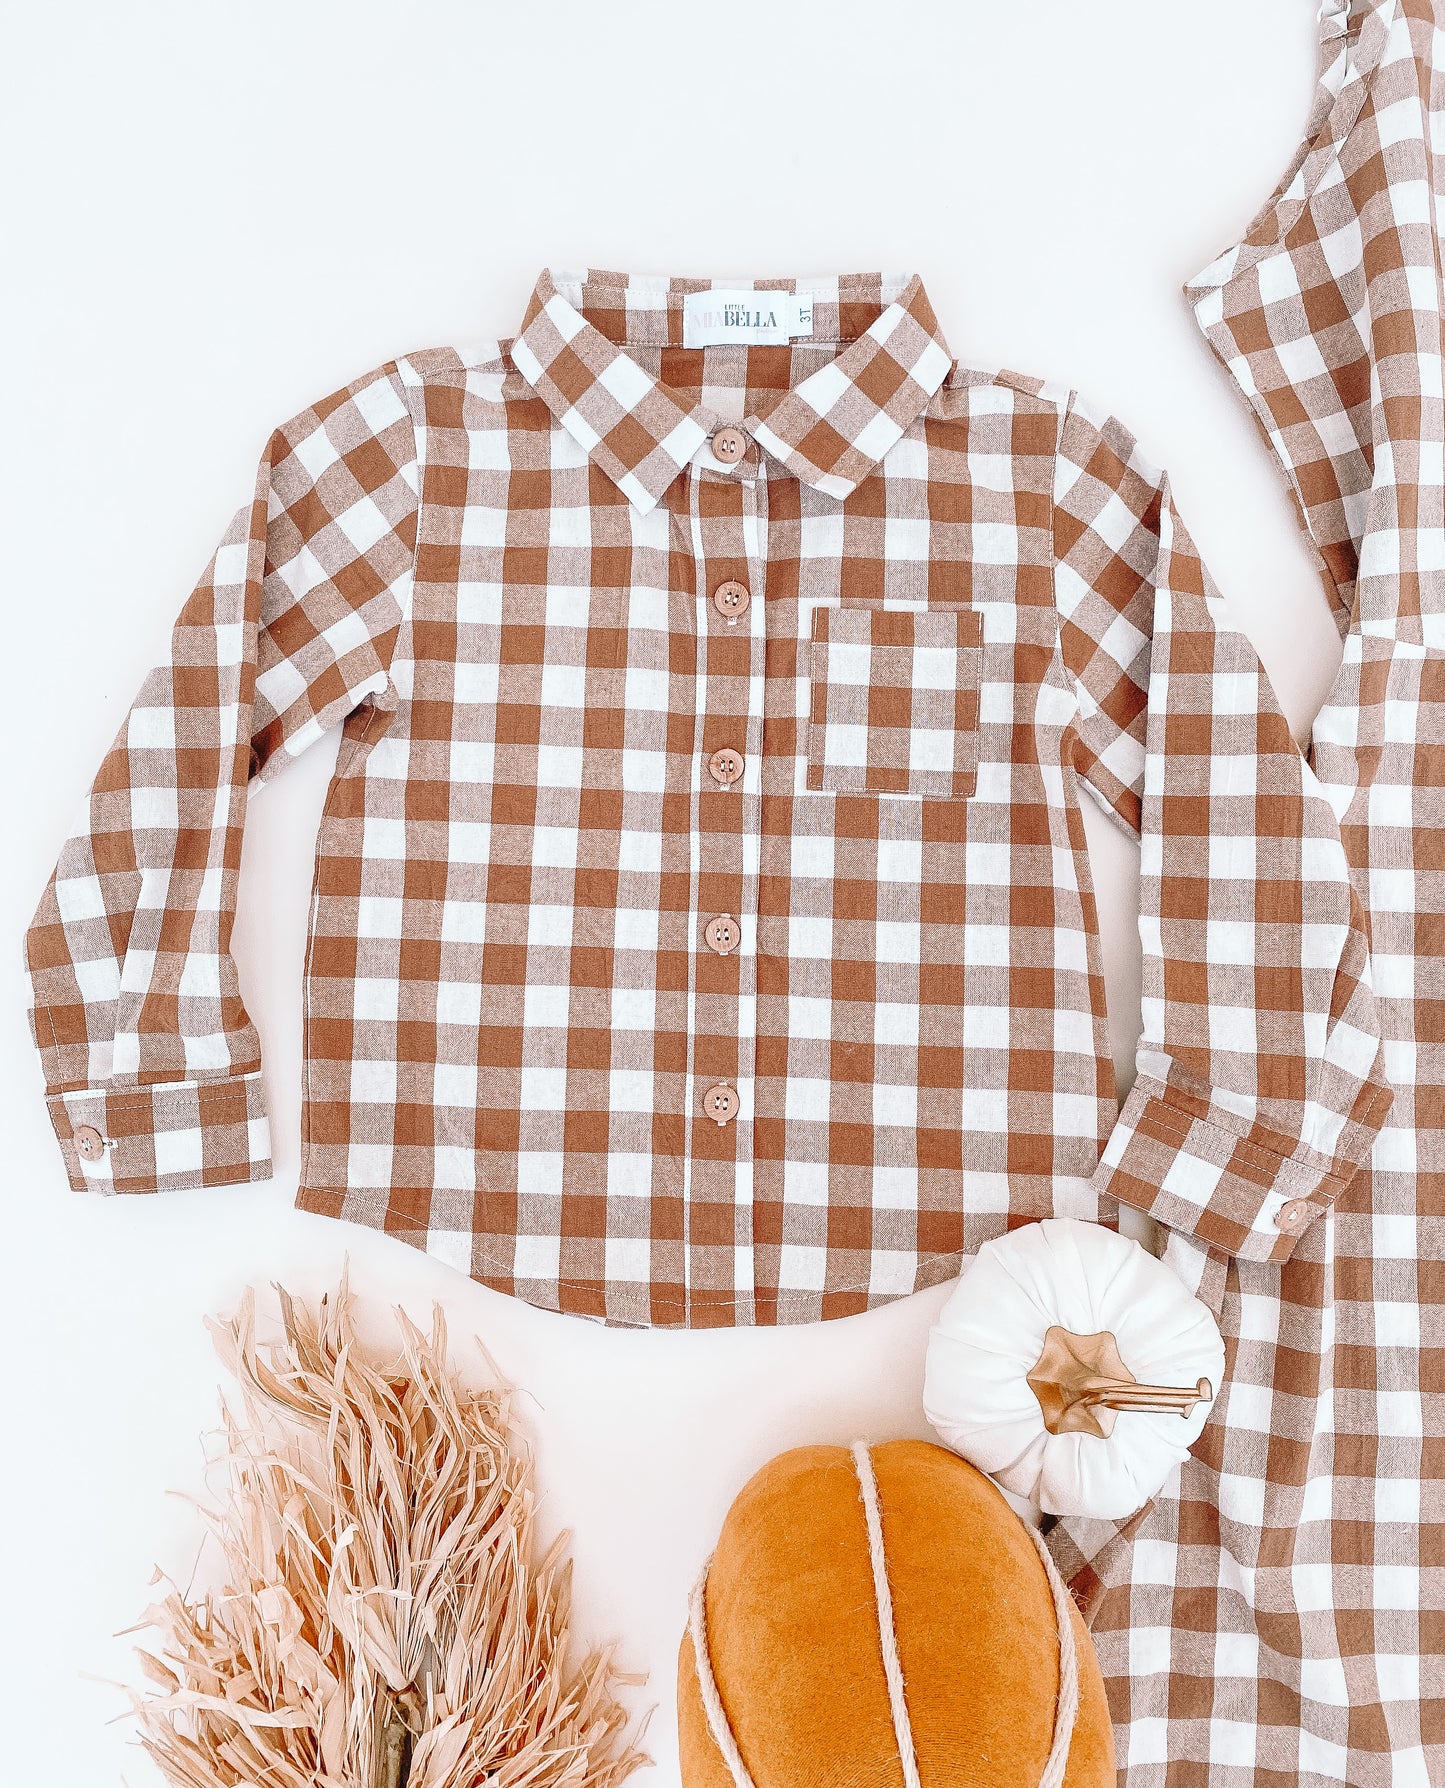 Boy flannel shirt with collar neckline. Pattern is brownish and white checkered style 